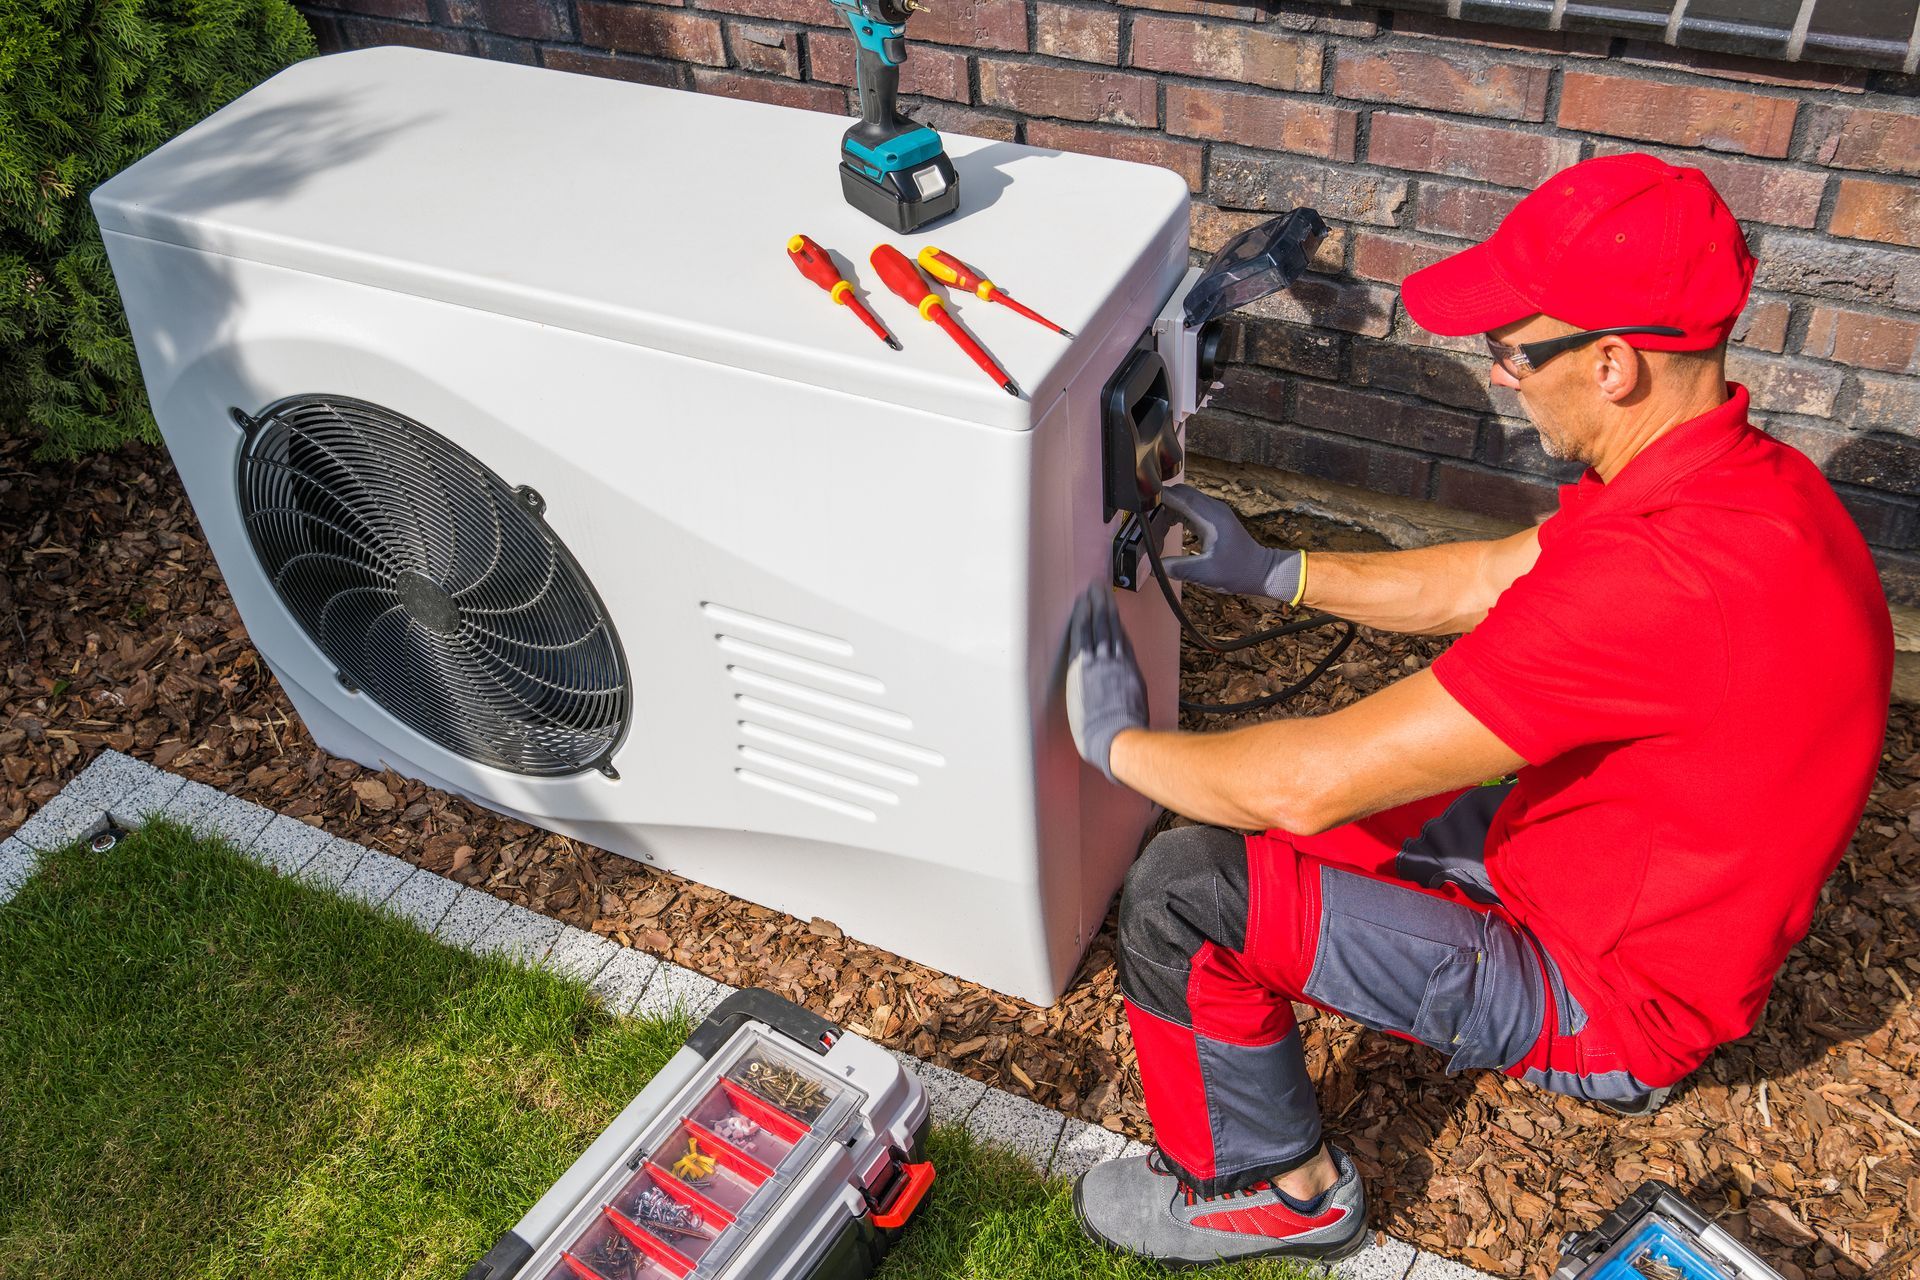 An experienced technician diligently repairing a heat pump unit, wearing protective gloves and using specialized tools to diagnose and fix the equipment.